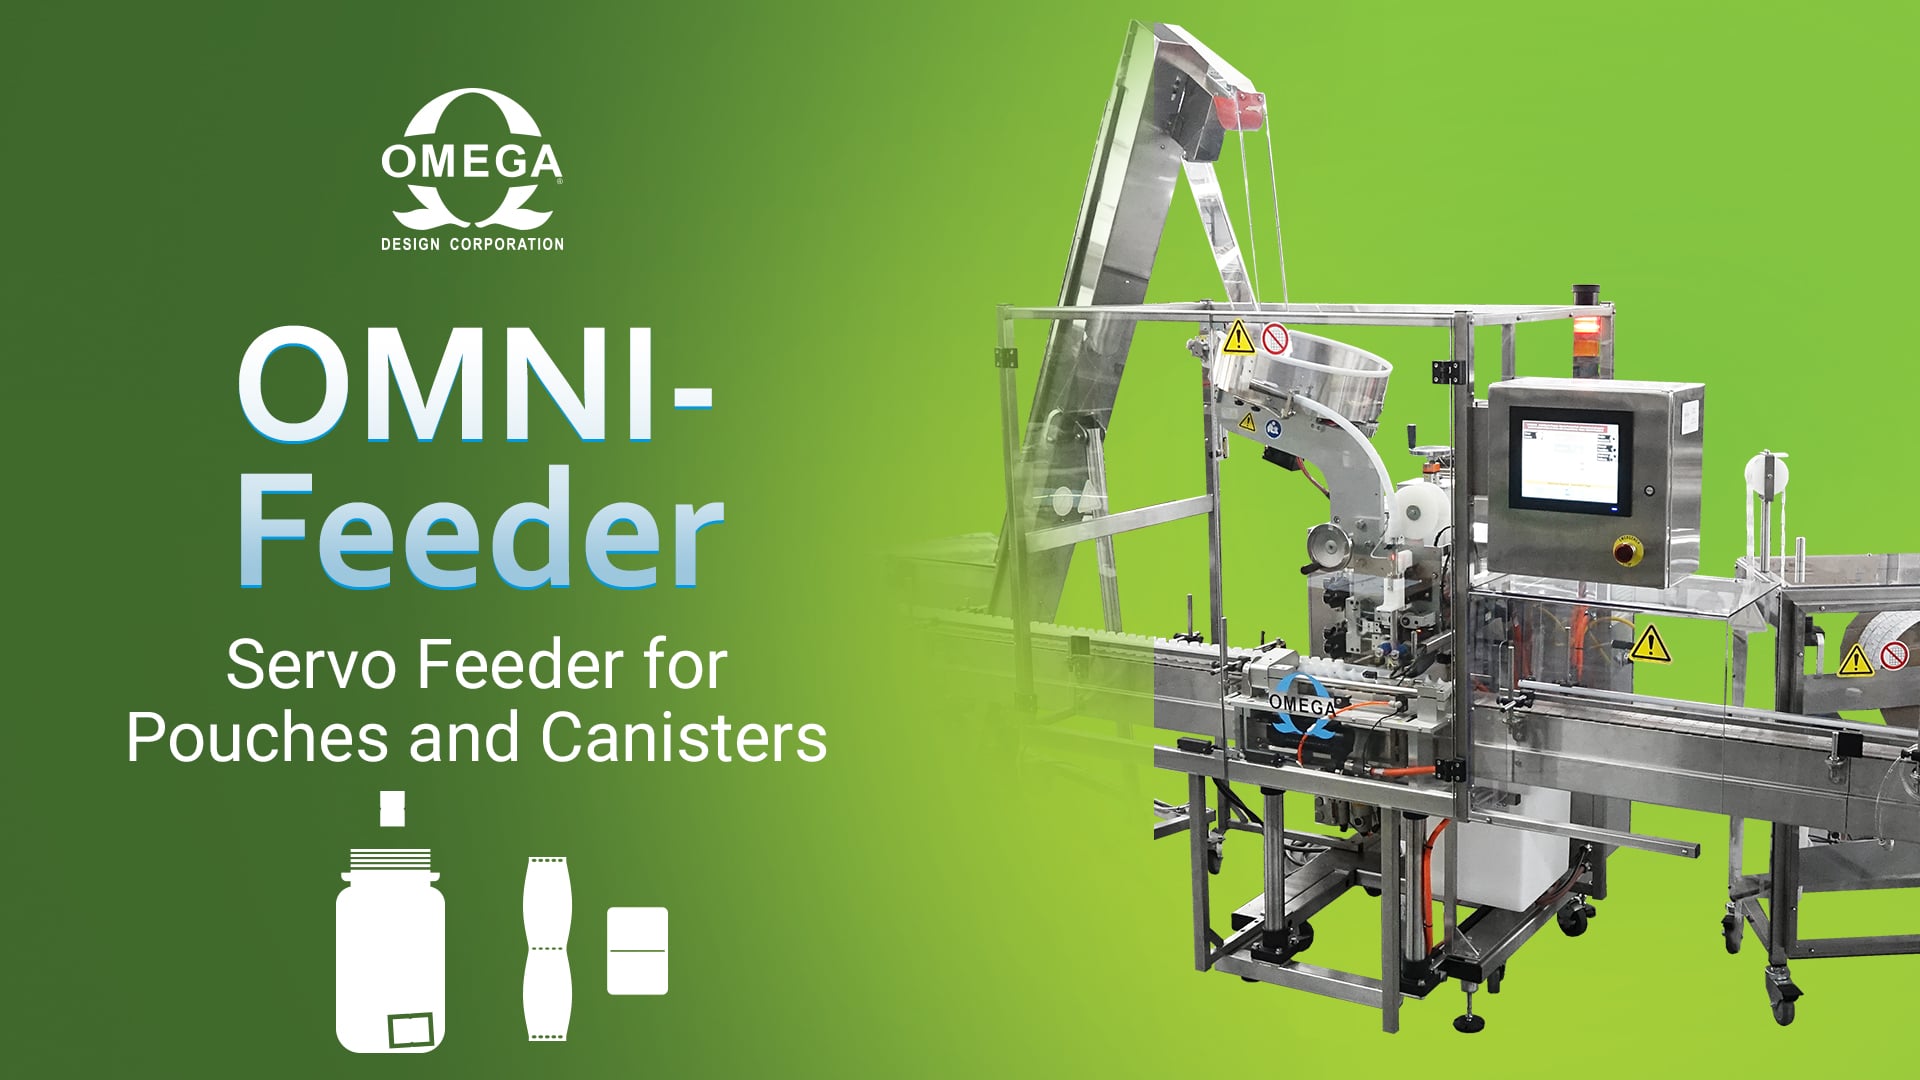 OMNI-Feeder - Servo Desiccant Feeder for Pouches and Canisters - Omega Design